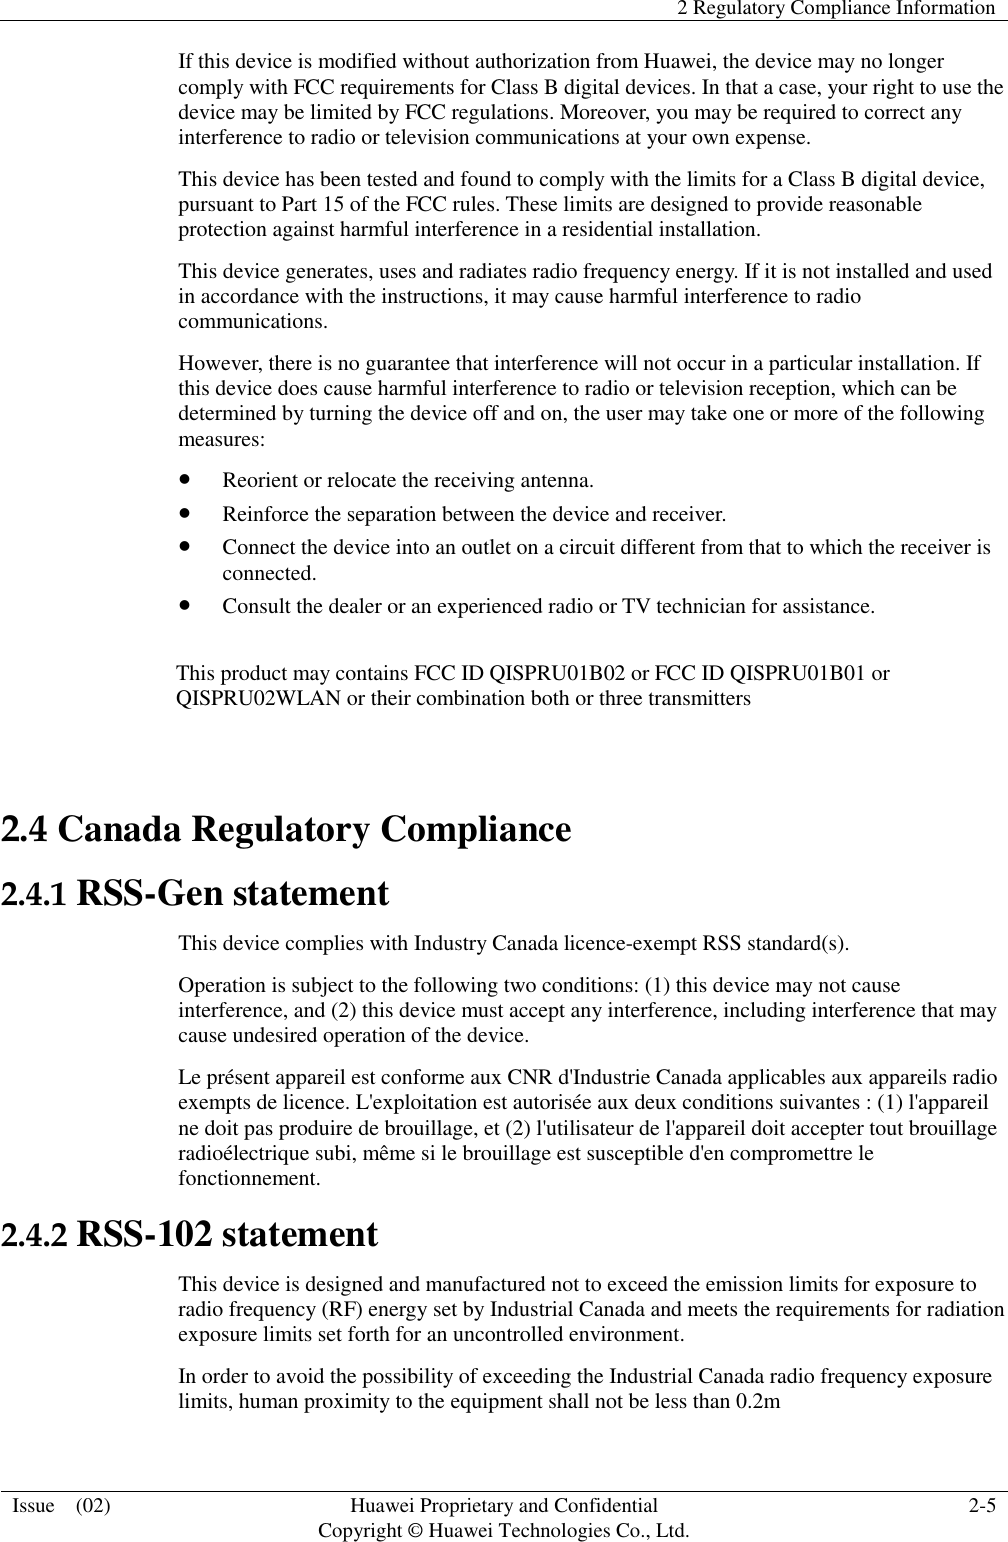   2 Regulatory Compliance Information  Issue    (02) Huawei Proprietary and Confidential                                     Copyright © Huawei Technologies Co., Ltd. 2-5  If this device is modified without authorization from Huawei, the device may no longer comply with FCC requirements for Class B digital devices. In that a case, your right to use the device may be limited by FCC regulations. Moreover, you may be required to correct any interference to radio or television communications at your own expense. This device has been tested and found to comply with the limits for a Class B digital device, pursuant to Part 15 of the FCC rules. These limits are designed to provide reasonable protection against harmful interference in a residential installation. This device generates, uses and radiates radio frequency energy. If it is not installed and used in accordance with the instructions, it may cause harmful interference to radio communications. However, there is no guarantee that interference will not occur in a particular installation. If this device does cause harmful interference to radio or television reception, which can be determined by turning the device off and on, the user may take one or more of the following measures:  Reorient or relocate the receiving antenna.  Reinforce the separation between the device and receiver.  Connect the device into an outlet on a circuit different from that to which the receiver is connected.  Consult the dealer or an experienced radio or TV technician for assistance.  This product may contains FCC ID QISPRU01B02 or FCC ID QISPRU01B01 or QISPRU02WLAN or their combination both or three transmitters  2.4 Canada Regulatory Compliance 2.4.1 RSS-Gen statement This device complies with Industry Canada licence-exempt RSS standard(s). Operation is subject to the following two conditions: (1) this device may not cause interference, and (2) this device must accept any interference, including interference that may cause undesired operation of the device. Le présent appareil est conforme aux CNR d&apos;Industrie Canada applicables aux appareils radio exempts de licence. L&apos;exploitation est autorisée aux deux conditions suivantes : (1) l&apos;appareil ne doit pas produire de brouillage, et (2) l&apos;utilisateur de l&apos;appareil doit accepter tout brouillage radioélectrique subi, même si le brouillage est susceptible d&apos;en compromettre le fonctionnement. 2.4.2 RSS-102 statement This device is designed and manufactured not to exceed the emission limits for exposure to radio frequency (RF) energy set by Industrial Canada and meets the requirements for radiation exposure limits set forth for an uncontrolled environment. In order to avoid the possibility of exceeding the Industrial Canada radio frequency exposure limits, human proximity to the equipment shall not be less than 0.2m 